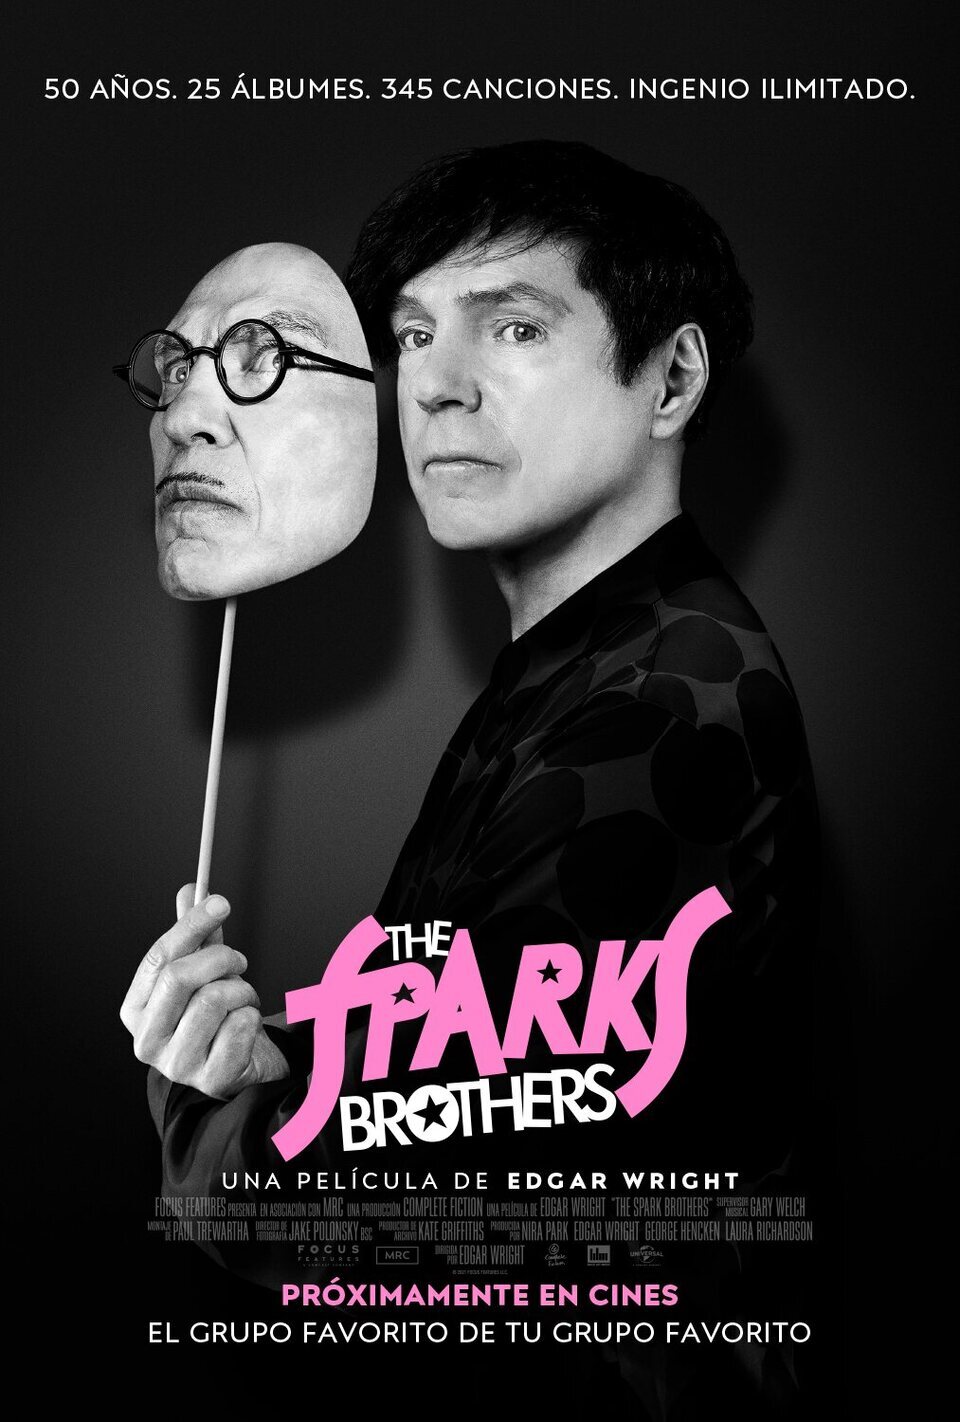 España poster for The Sparks Brothers